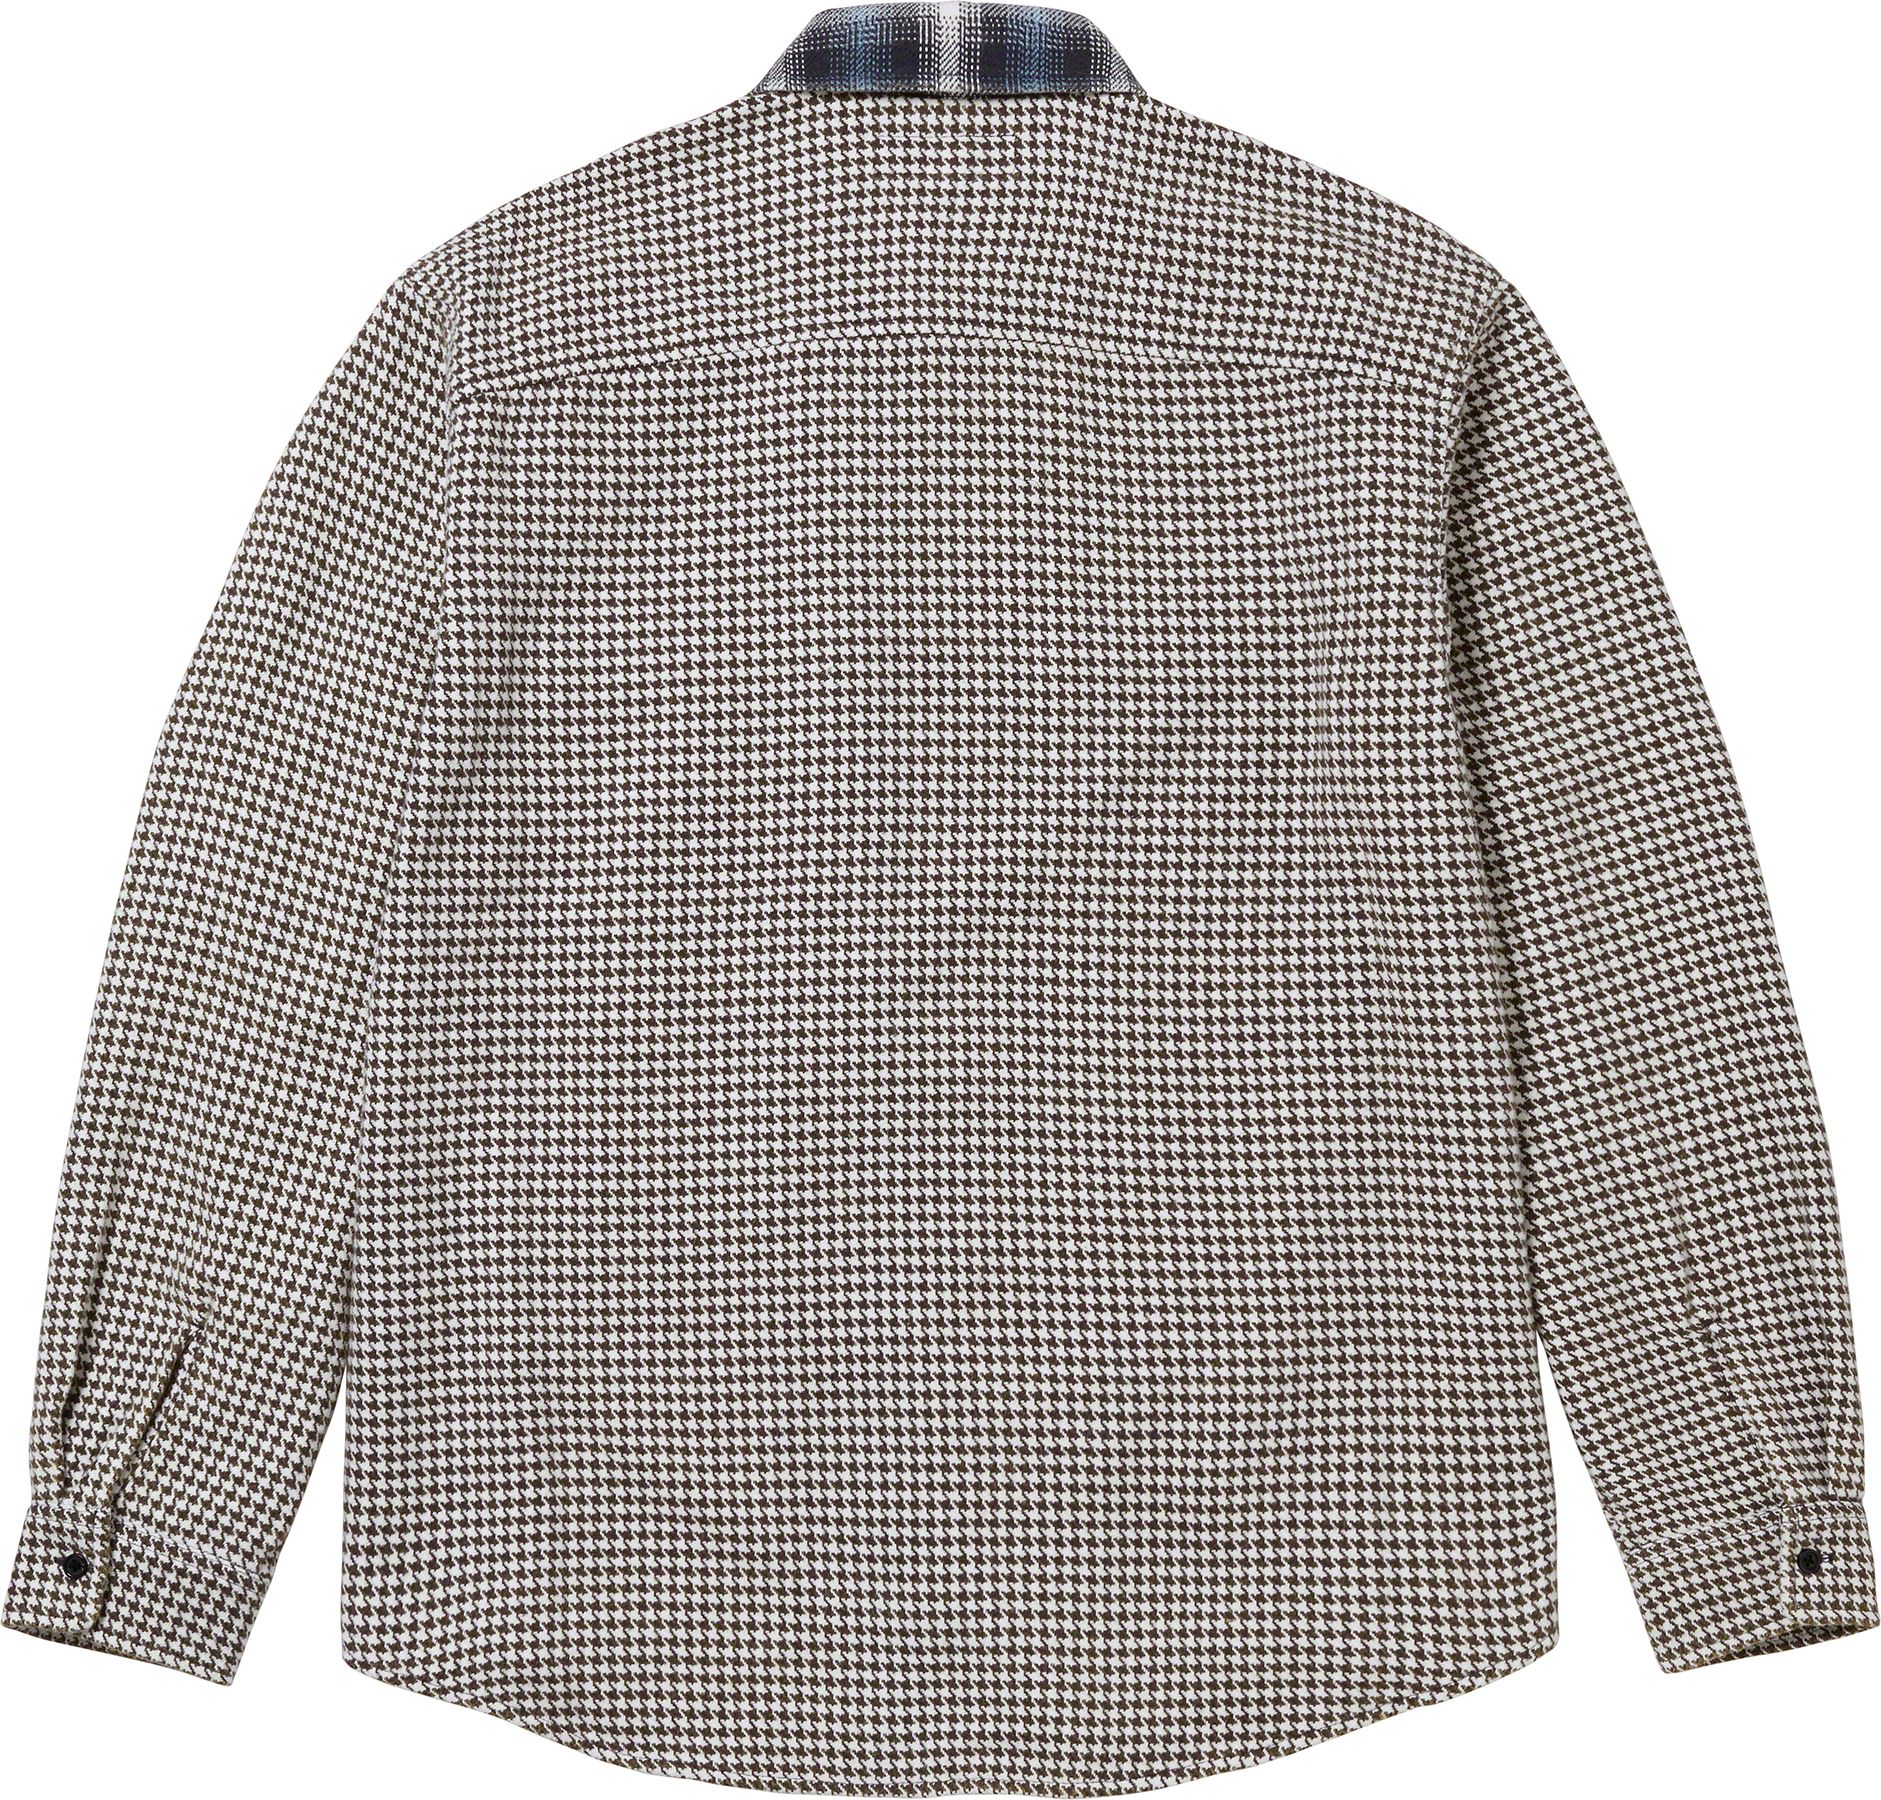 Houndstooth Plaid Flannel Shirt - fall winter 2023 - Supreme